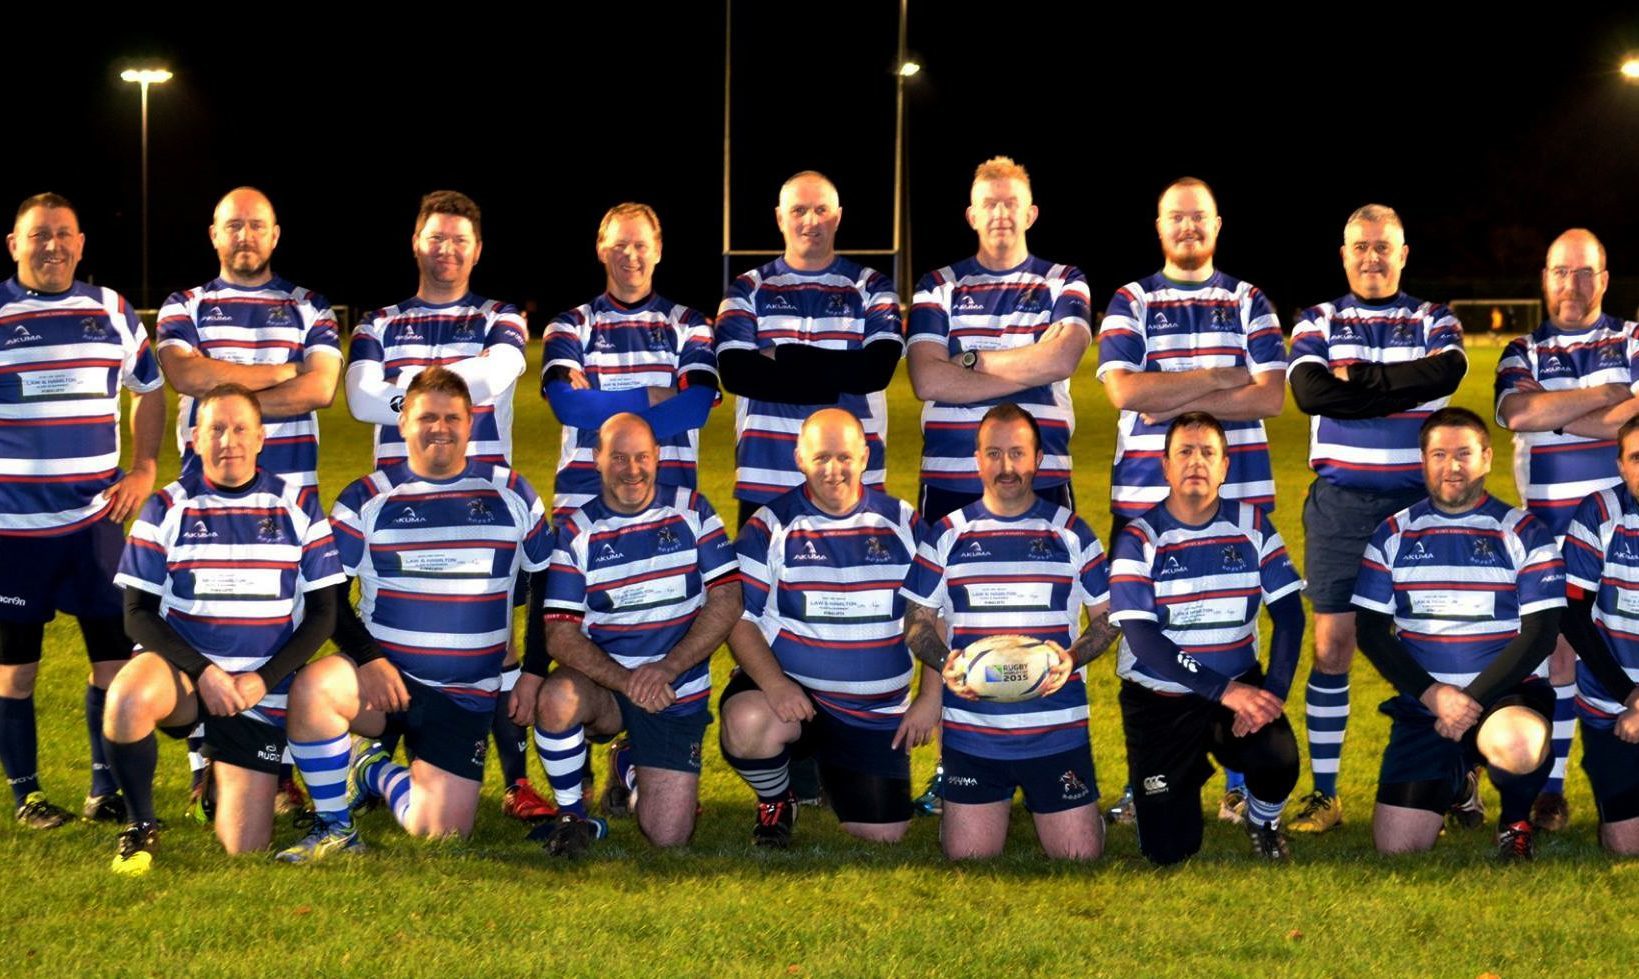 Players from the veteran Howe of Fife Knights team were called into action in the club’s moment of need.